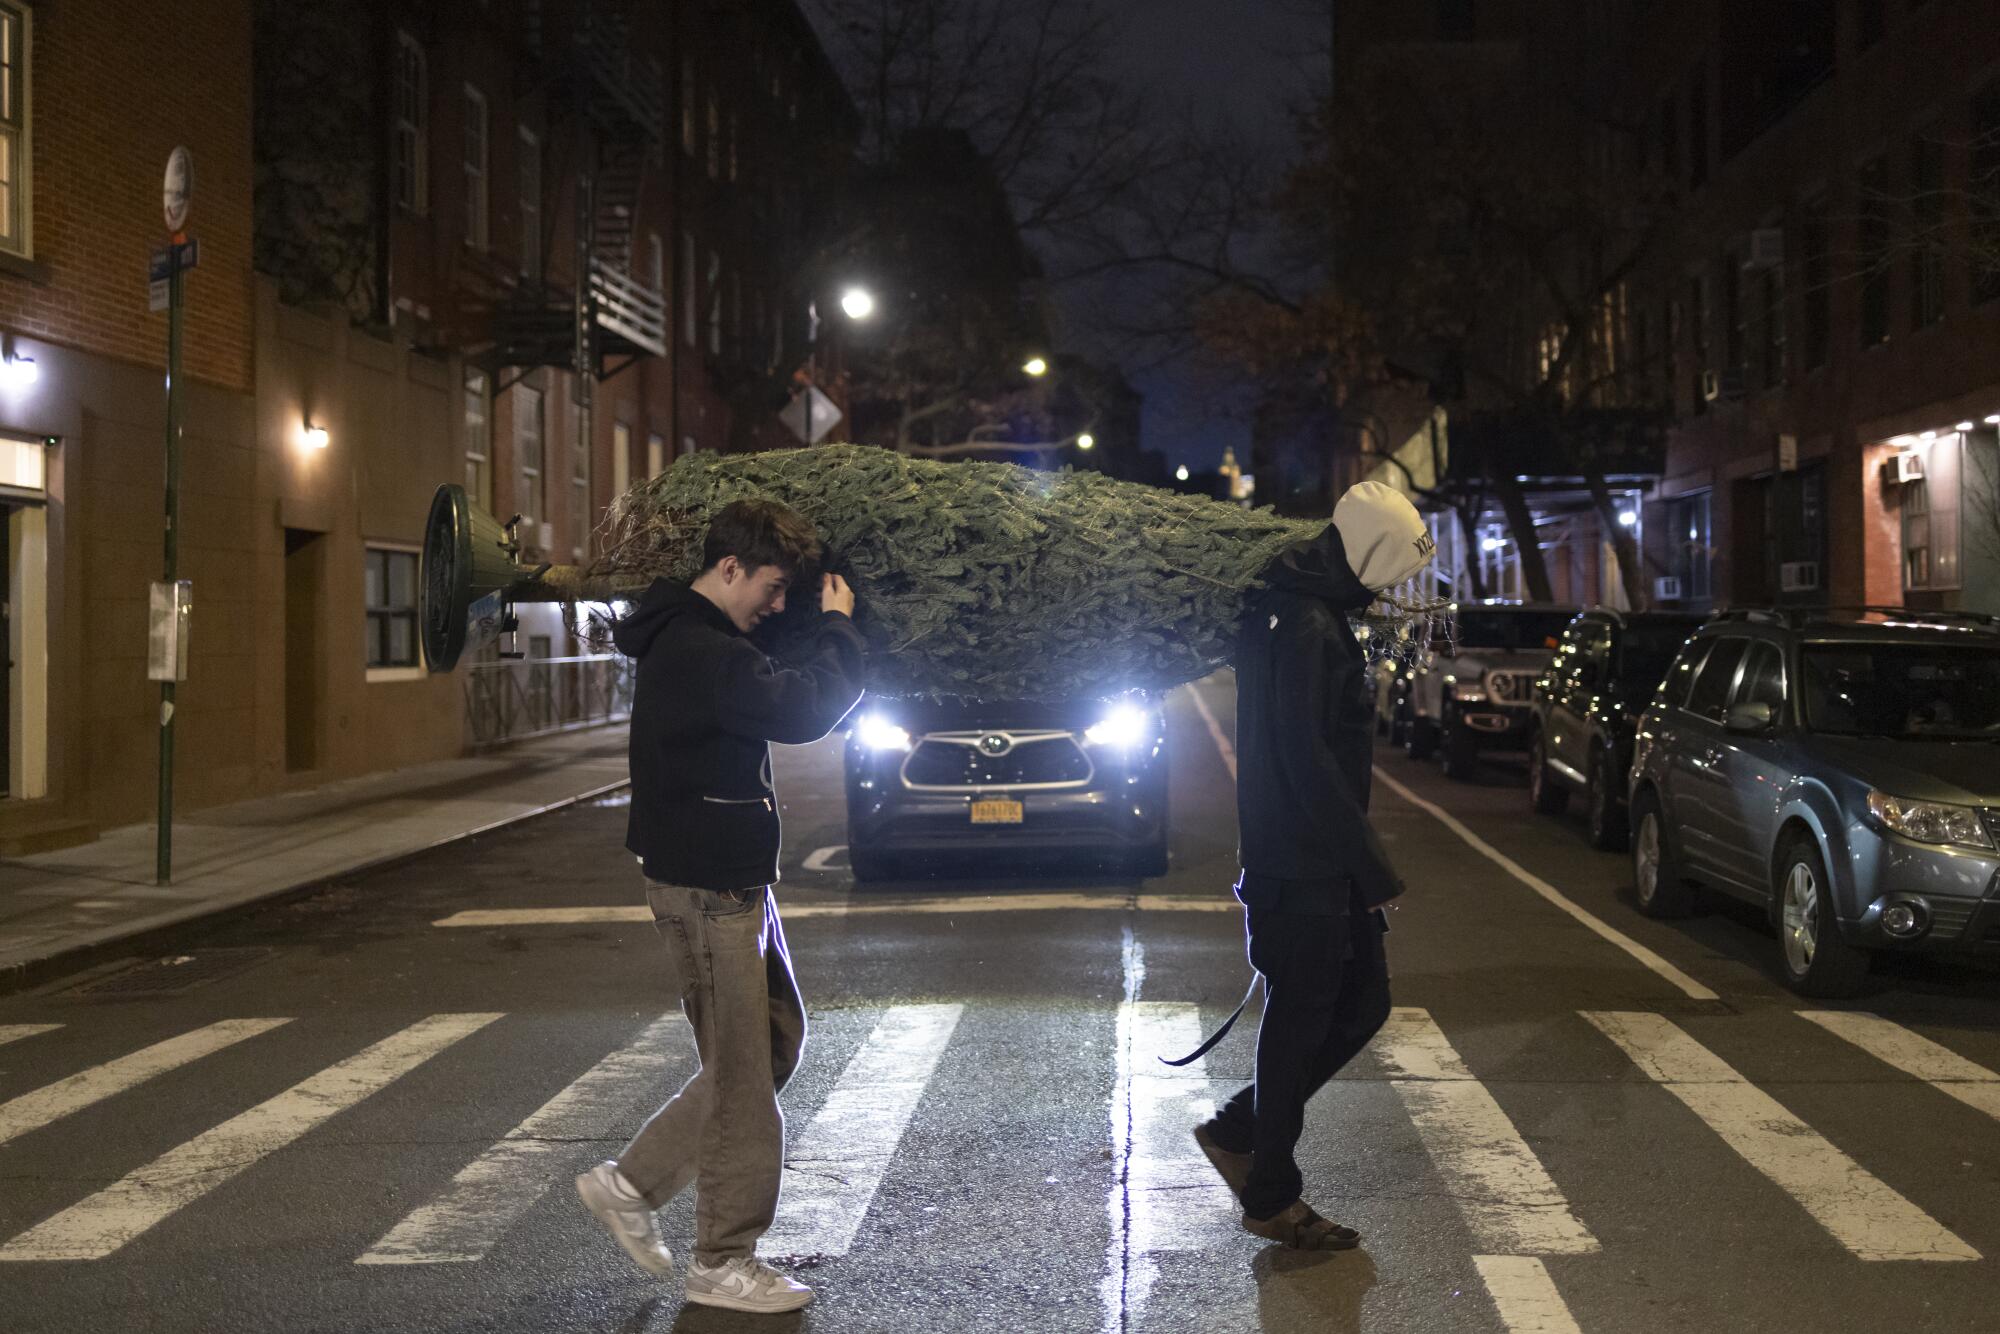 Two people carry a Christmas tree in a crosswalk.